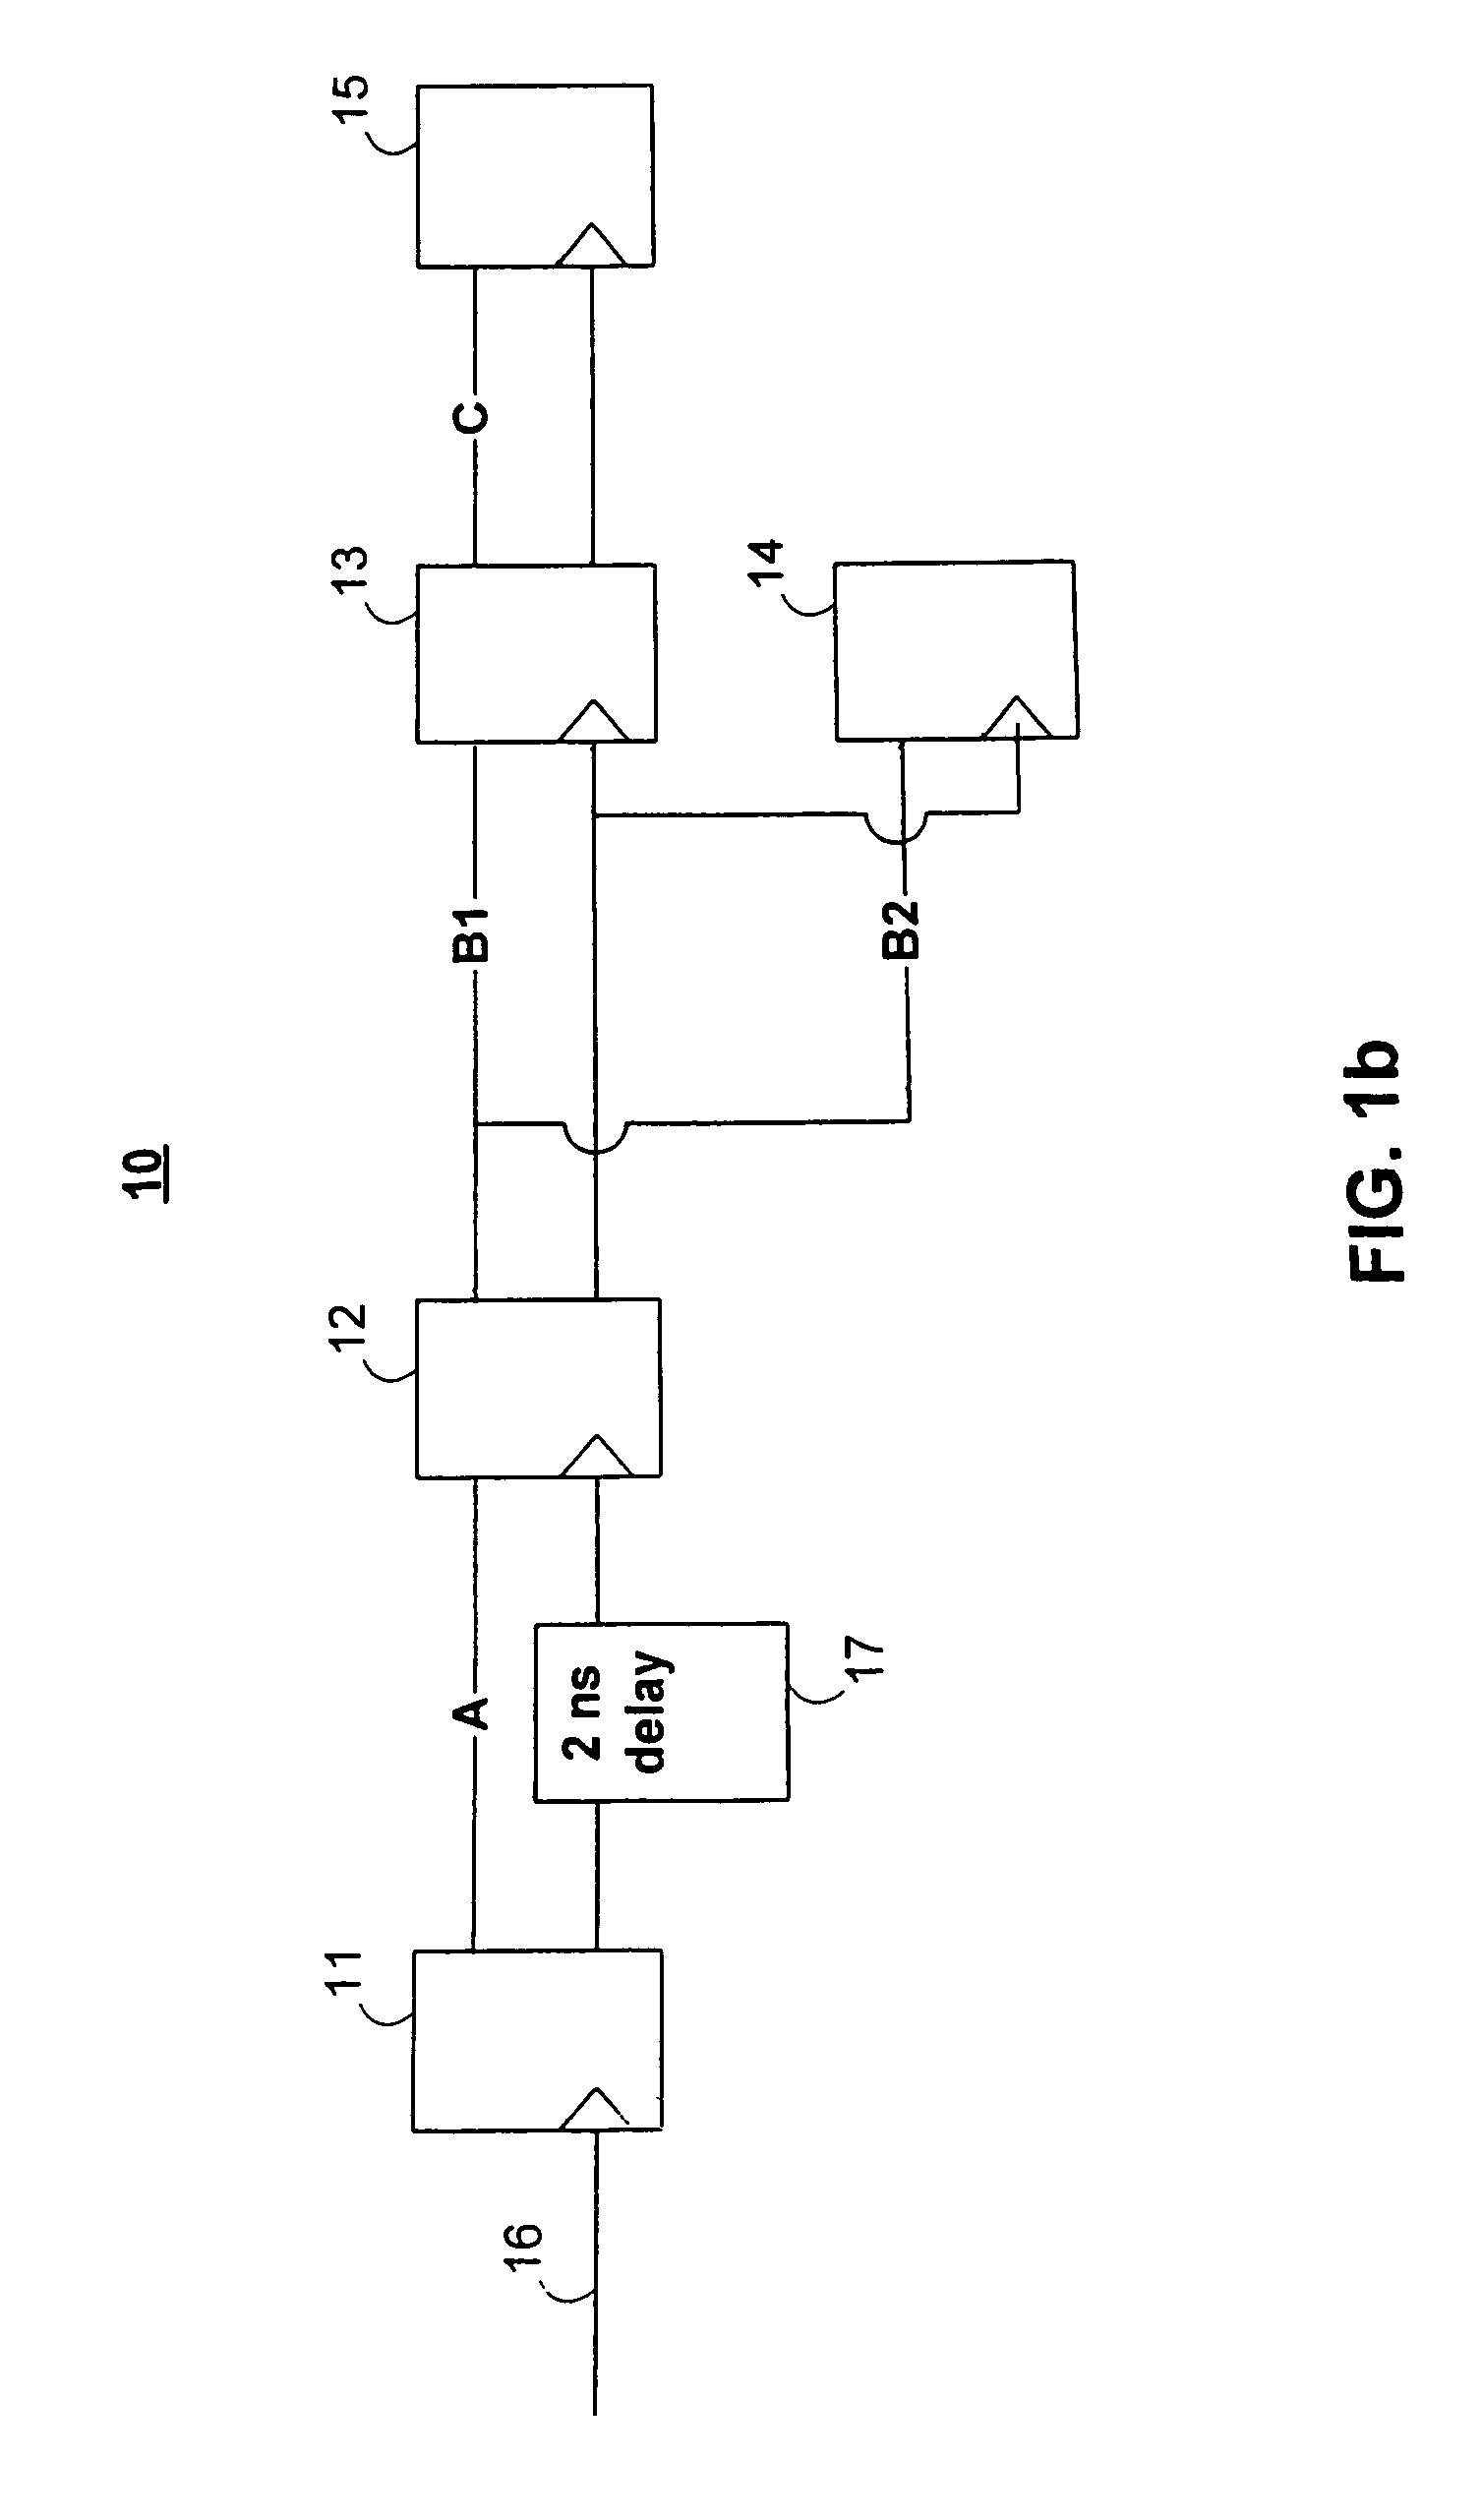 Programmable logic devices with skewed clocking signals